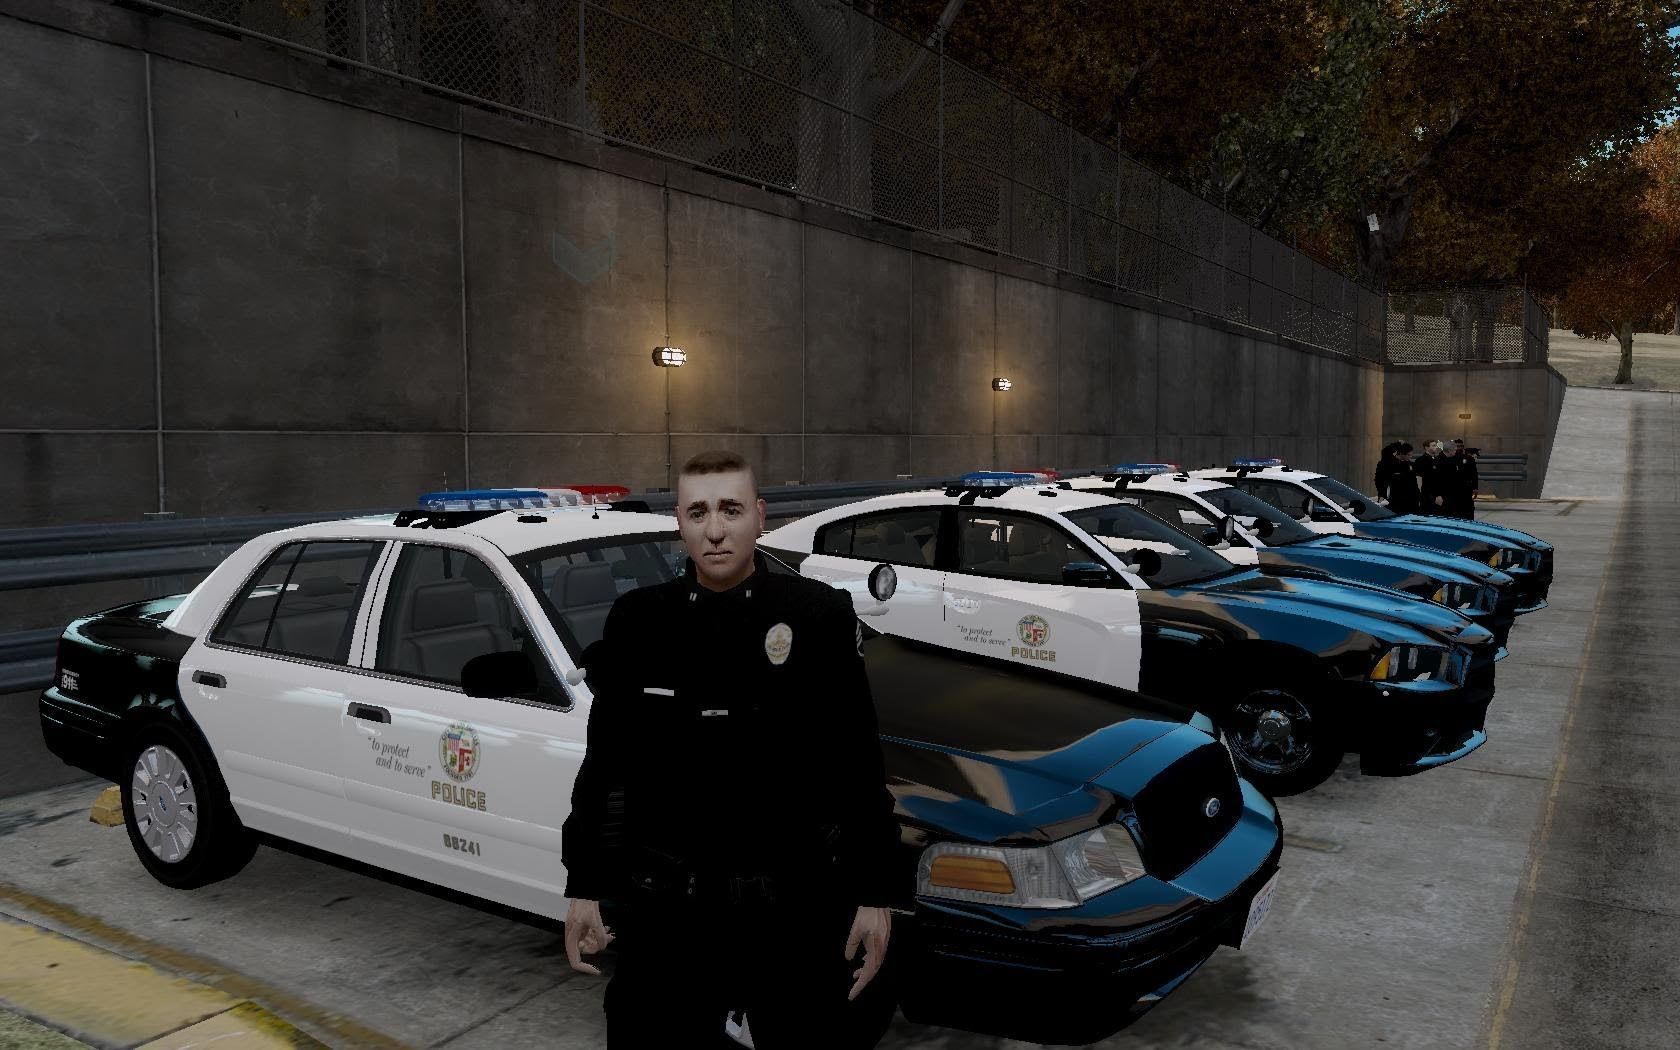 GTA IV RCMP Clan - Los Angeles Police Department LAPD - American